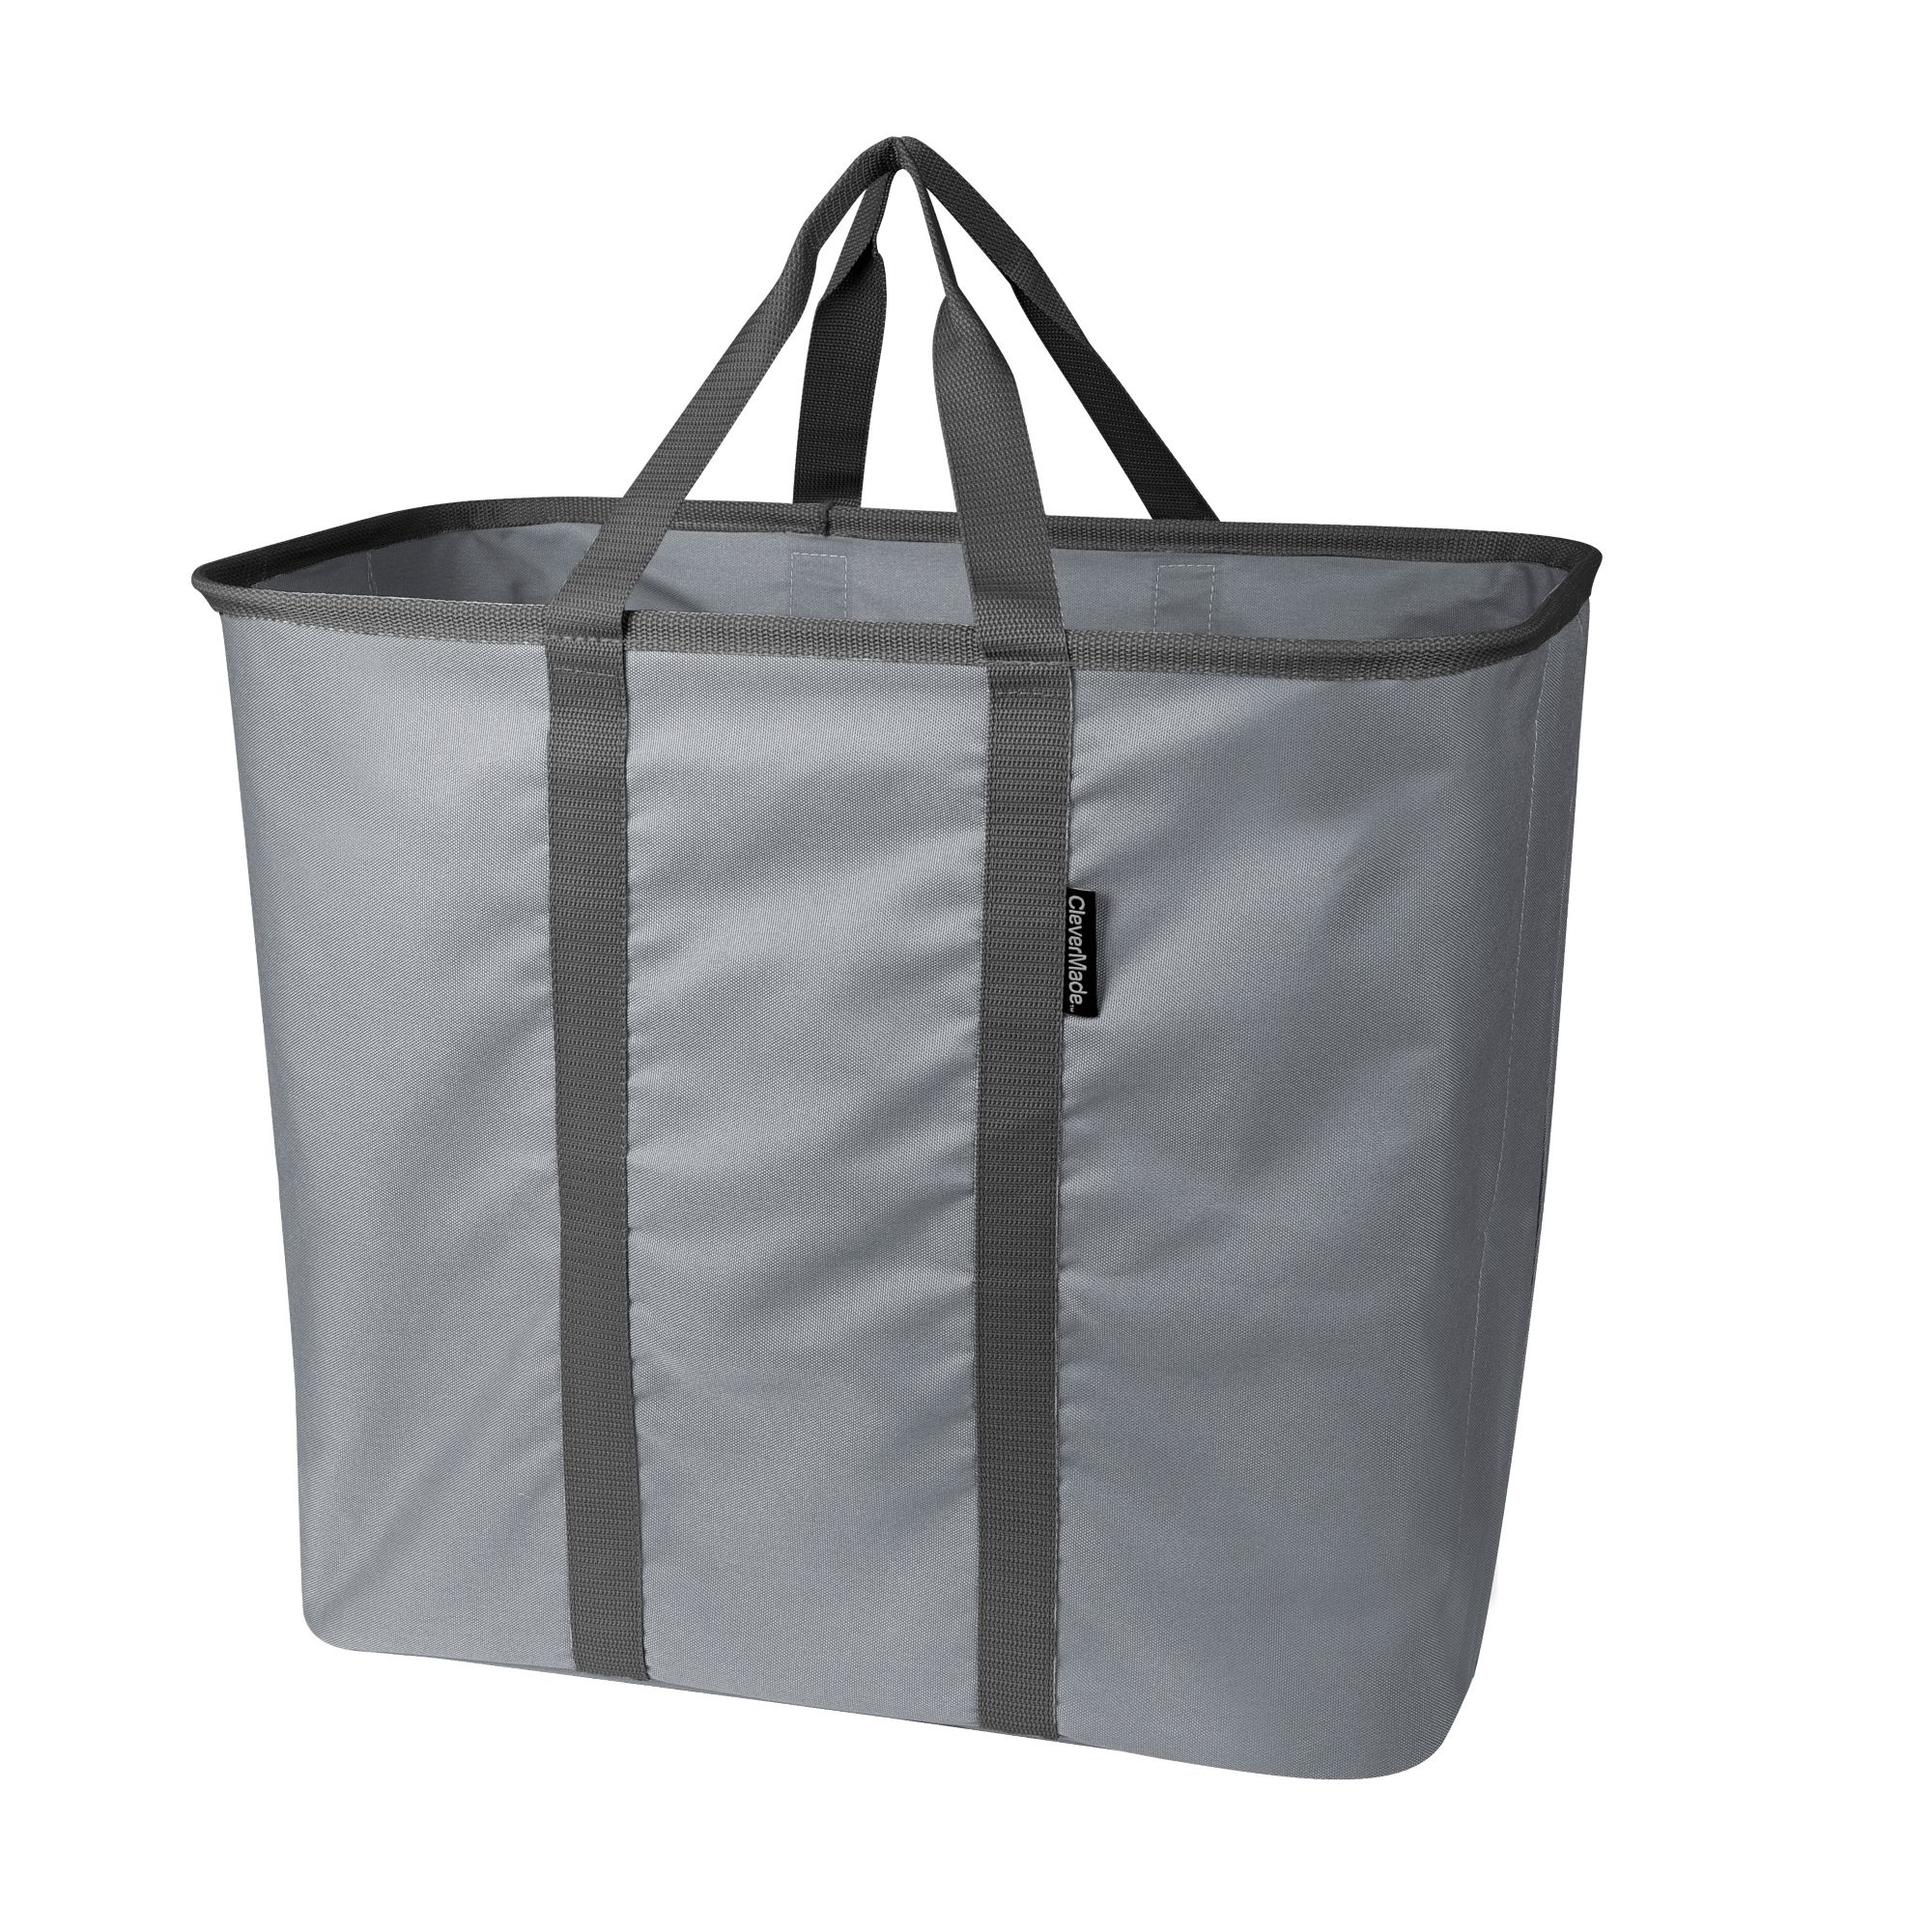 Collapsible Laundry Basket - (8 Gallon) Portable Hamper With